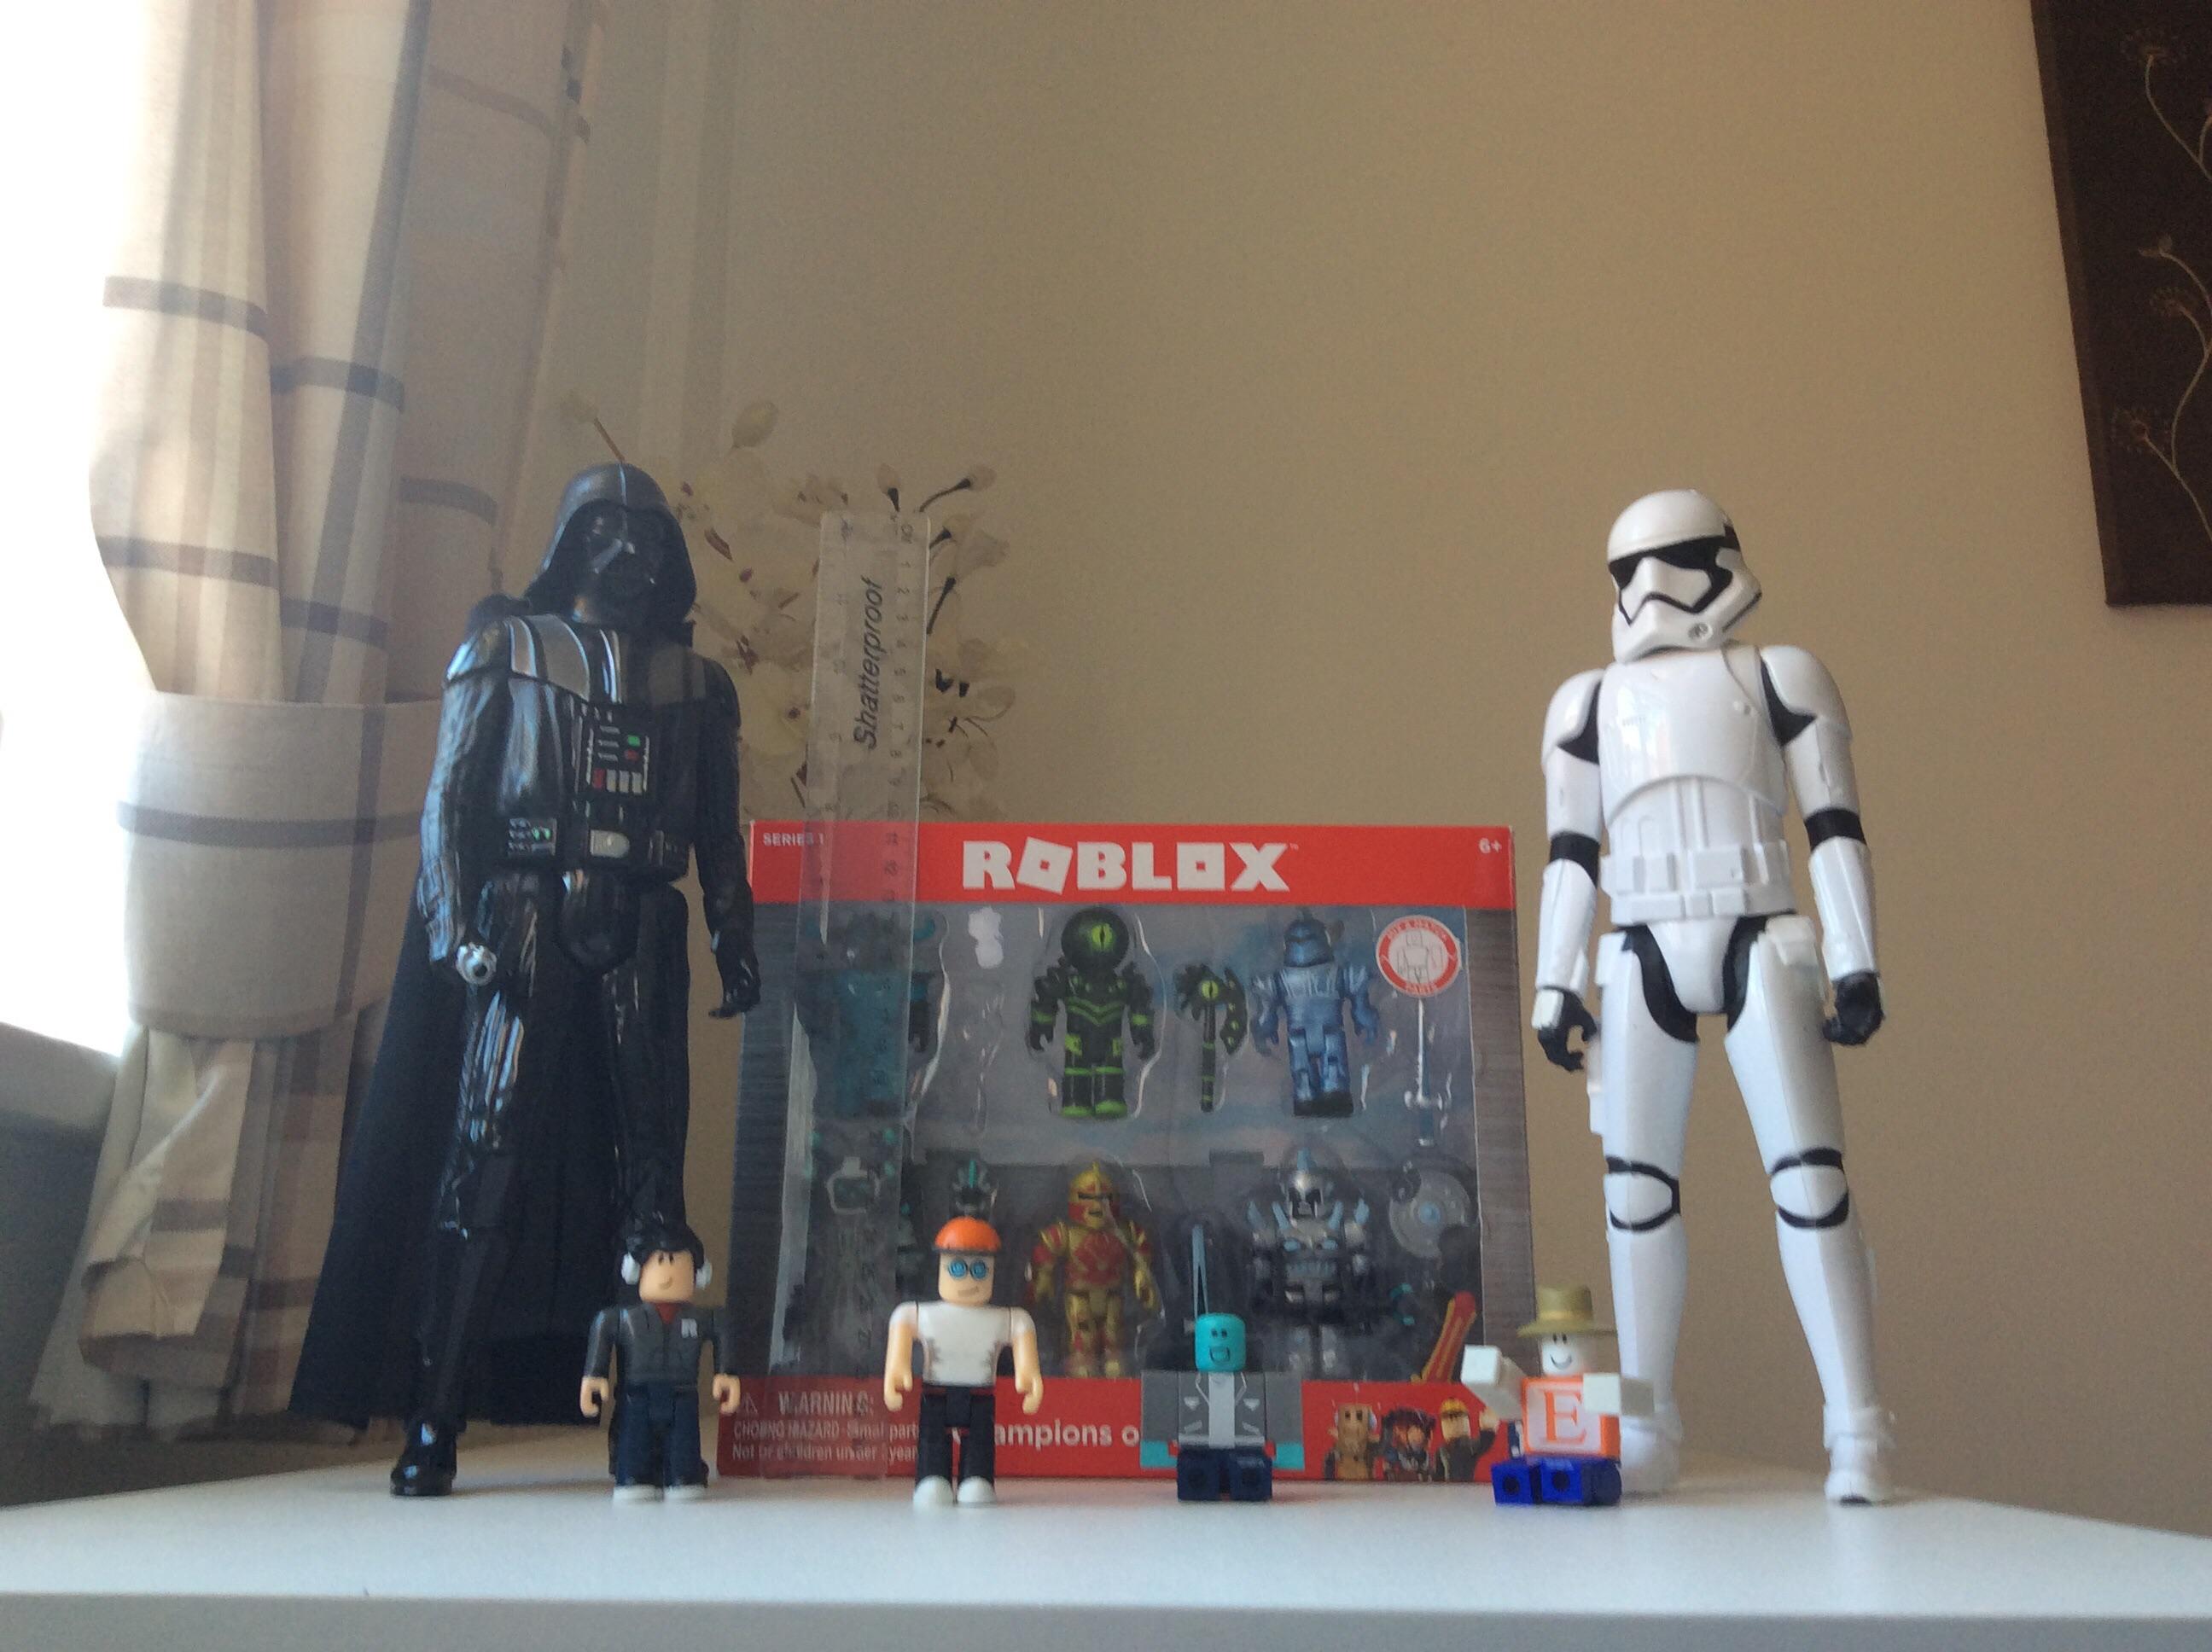 Roblox Star Wars Figures Collection In Great Sankey For 25 00 - hot darth vader roblox